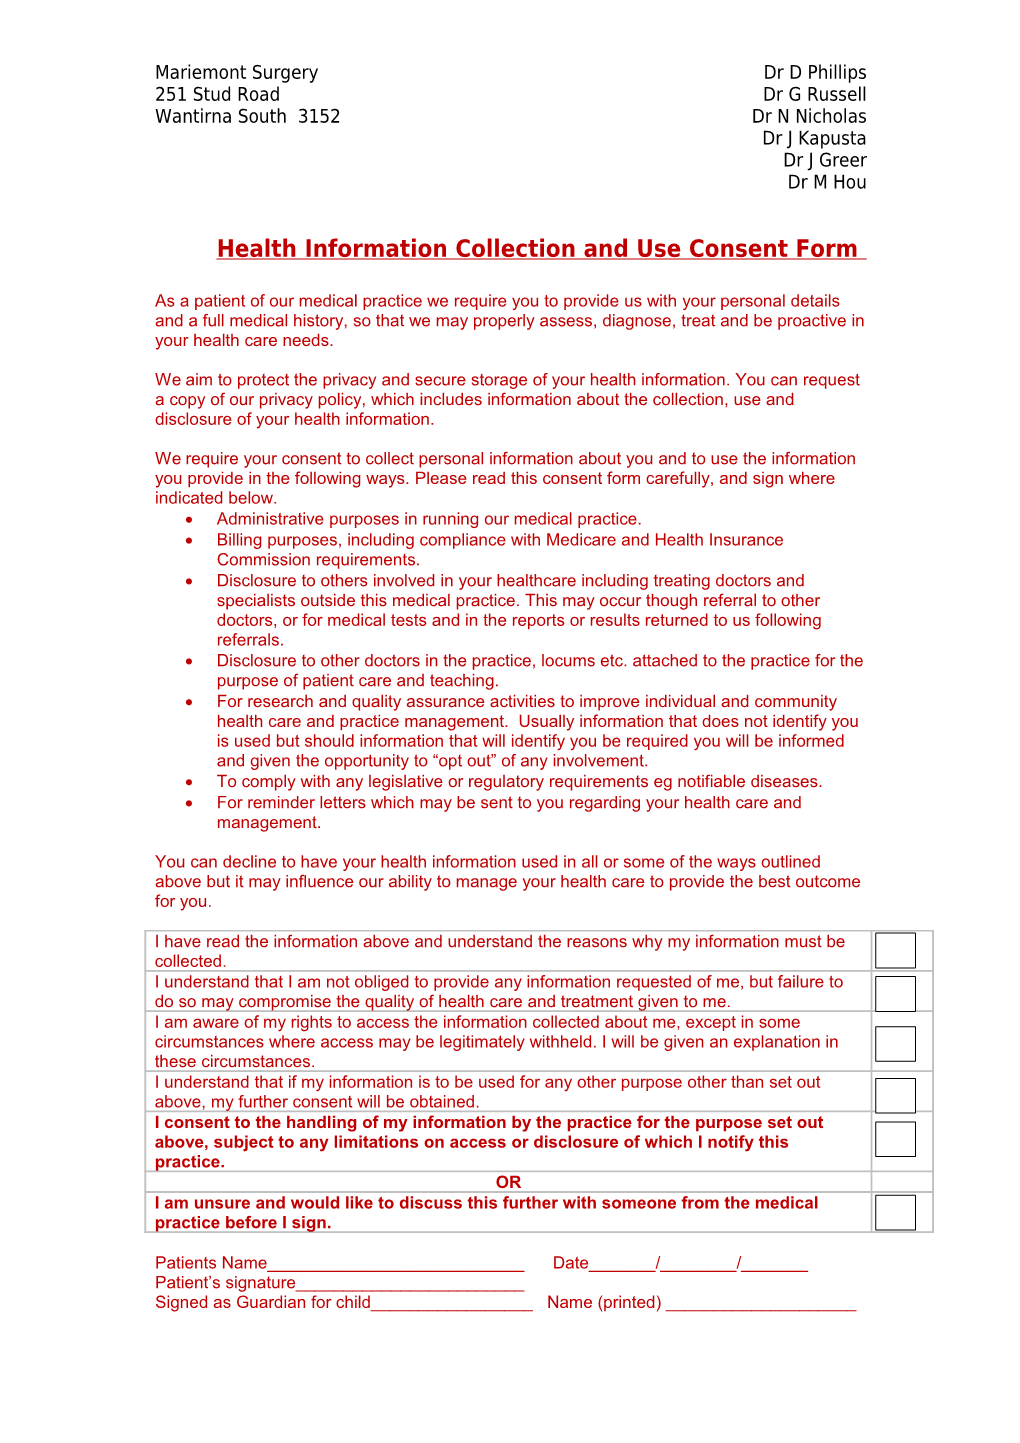 Health Information Collection and Use Consent Form